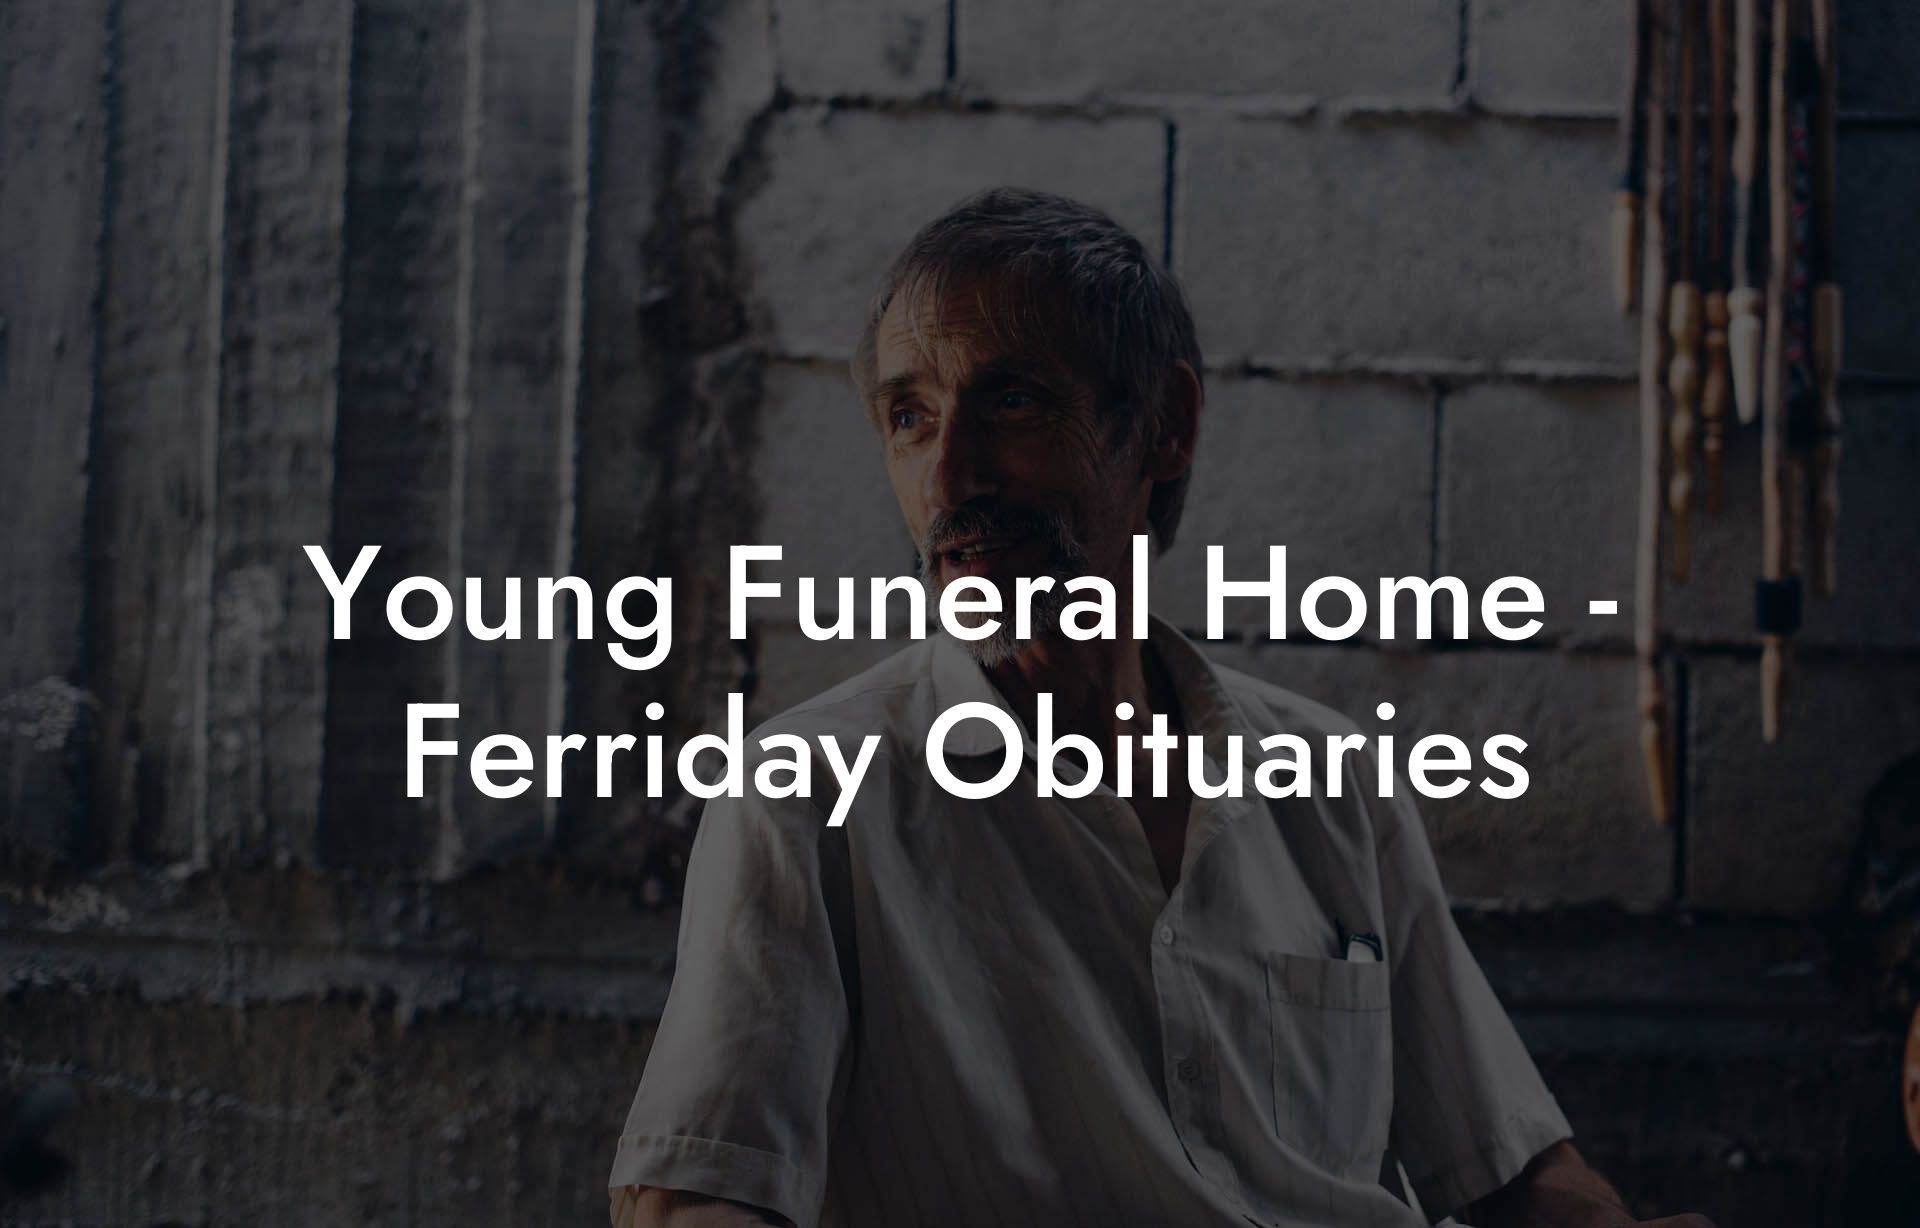 Young Funeral Home - Ferriday Obituaries